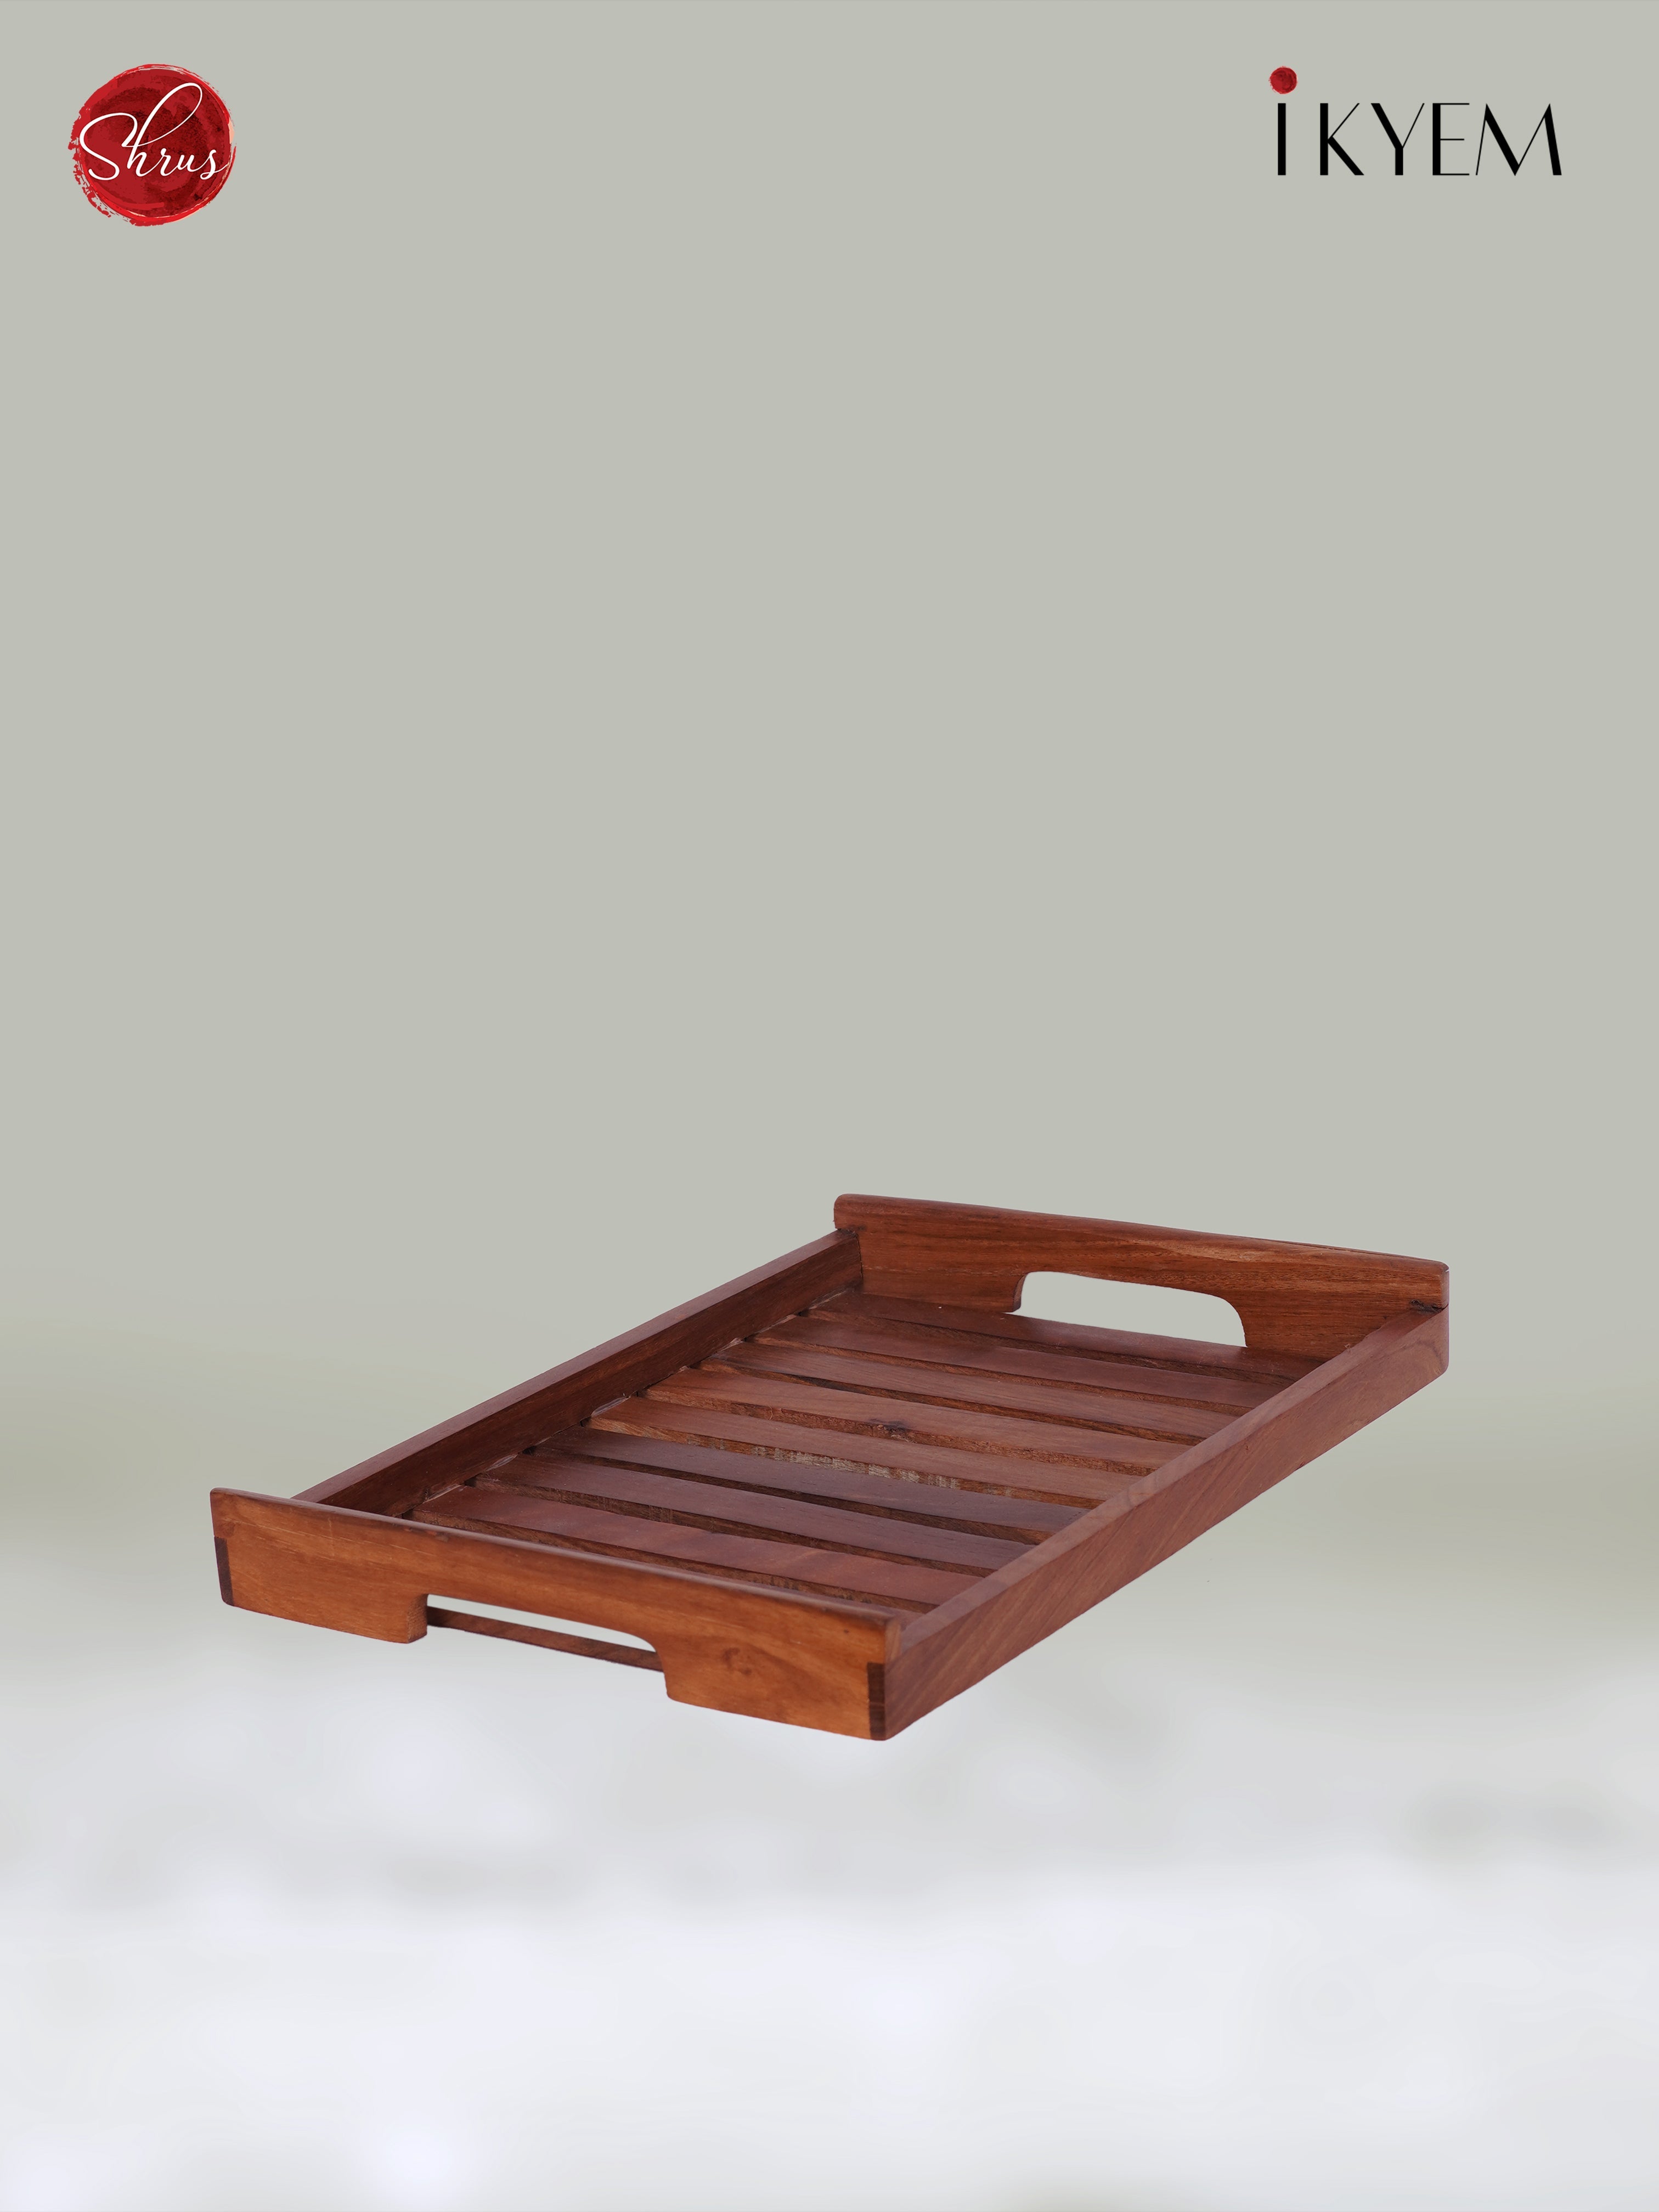 Hand Crafted Wooden Tray - Return Gift